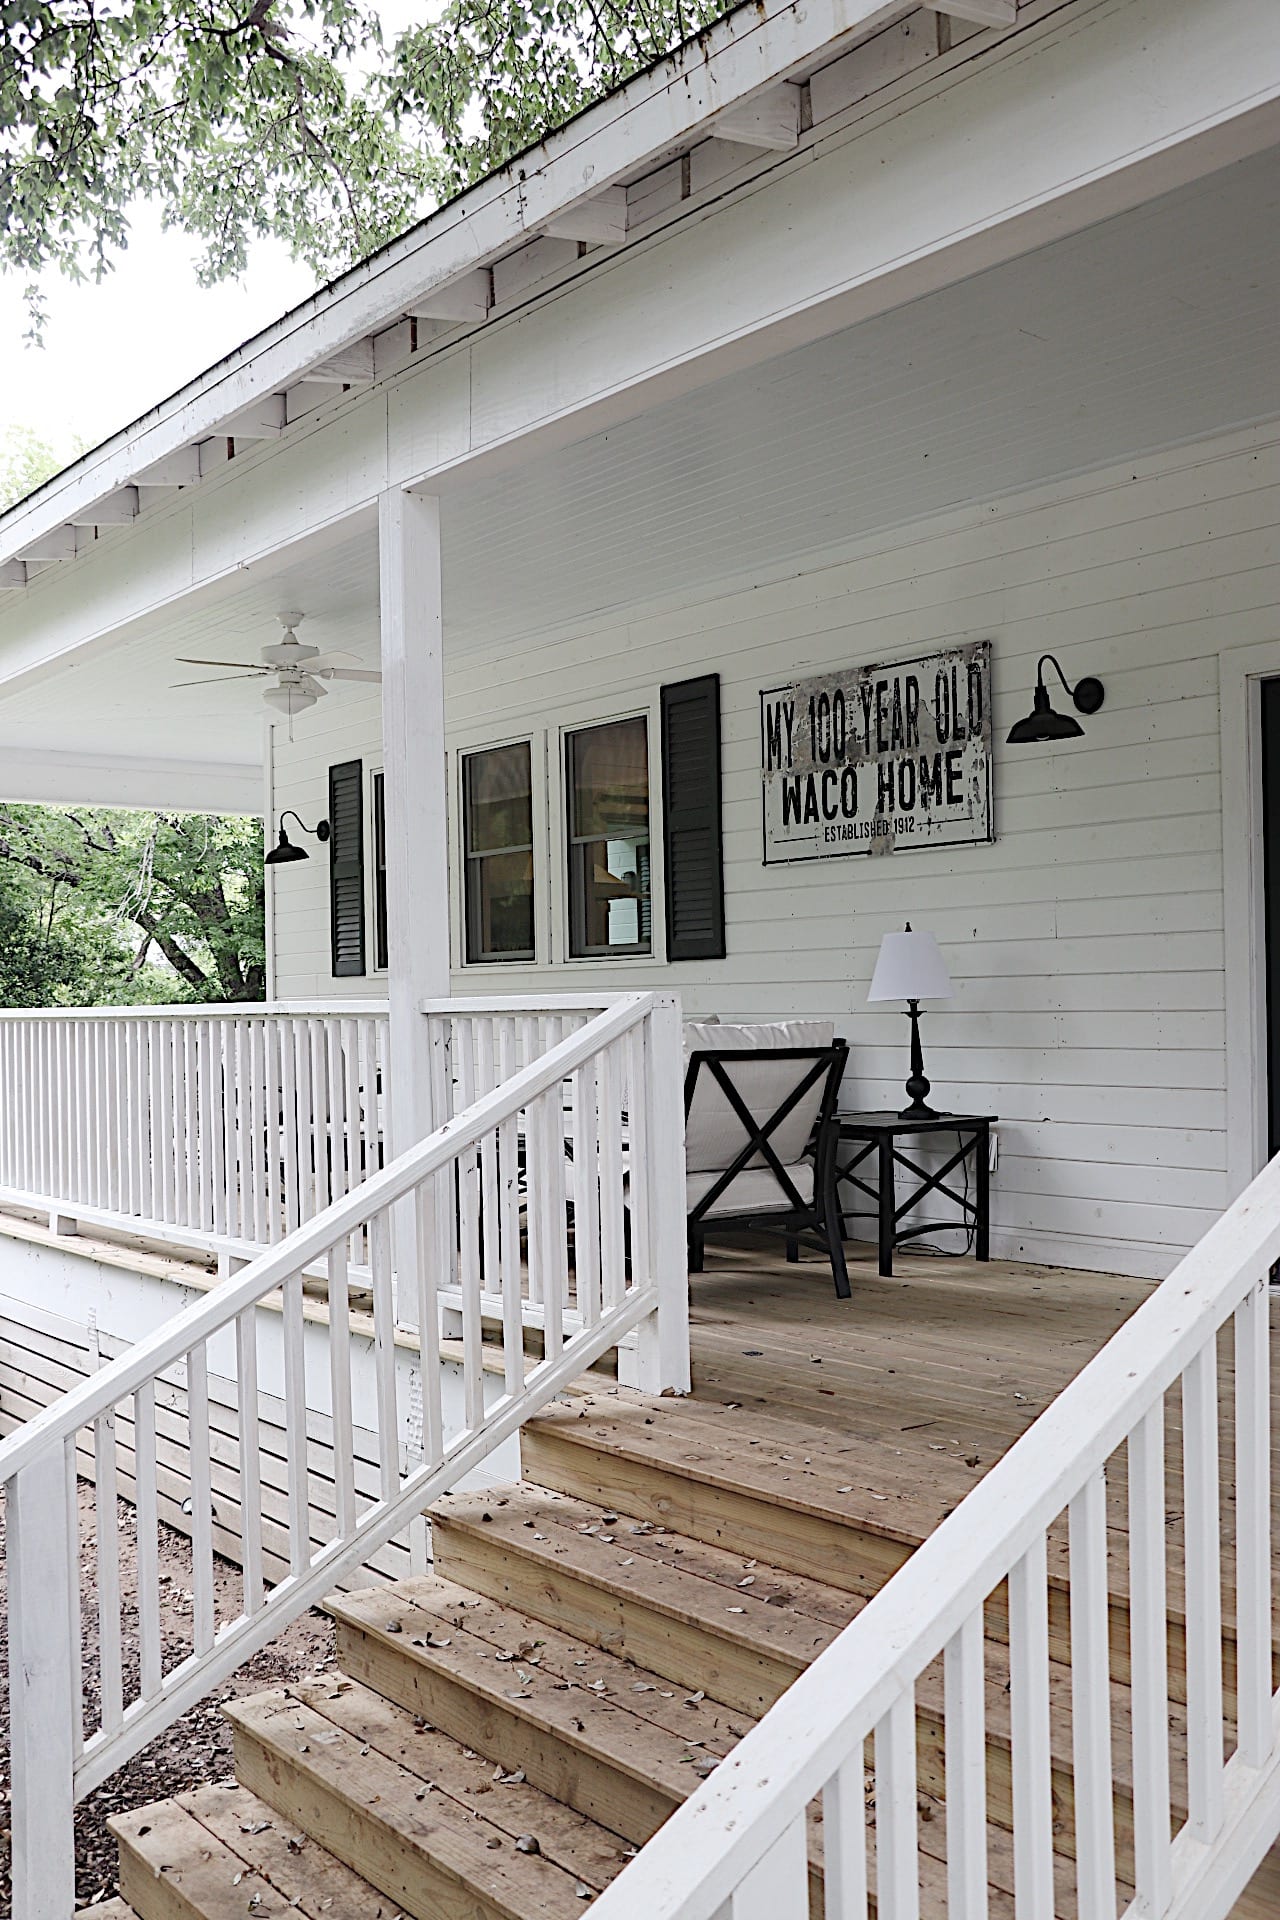 How We Built the Wrap Around Porch at our Waco Airbnb - MY 100 YEAR OLD HOME